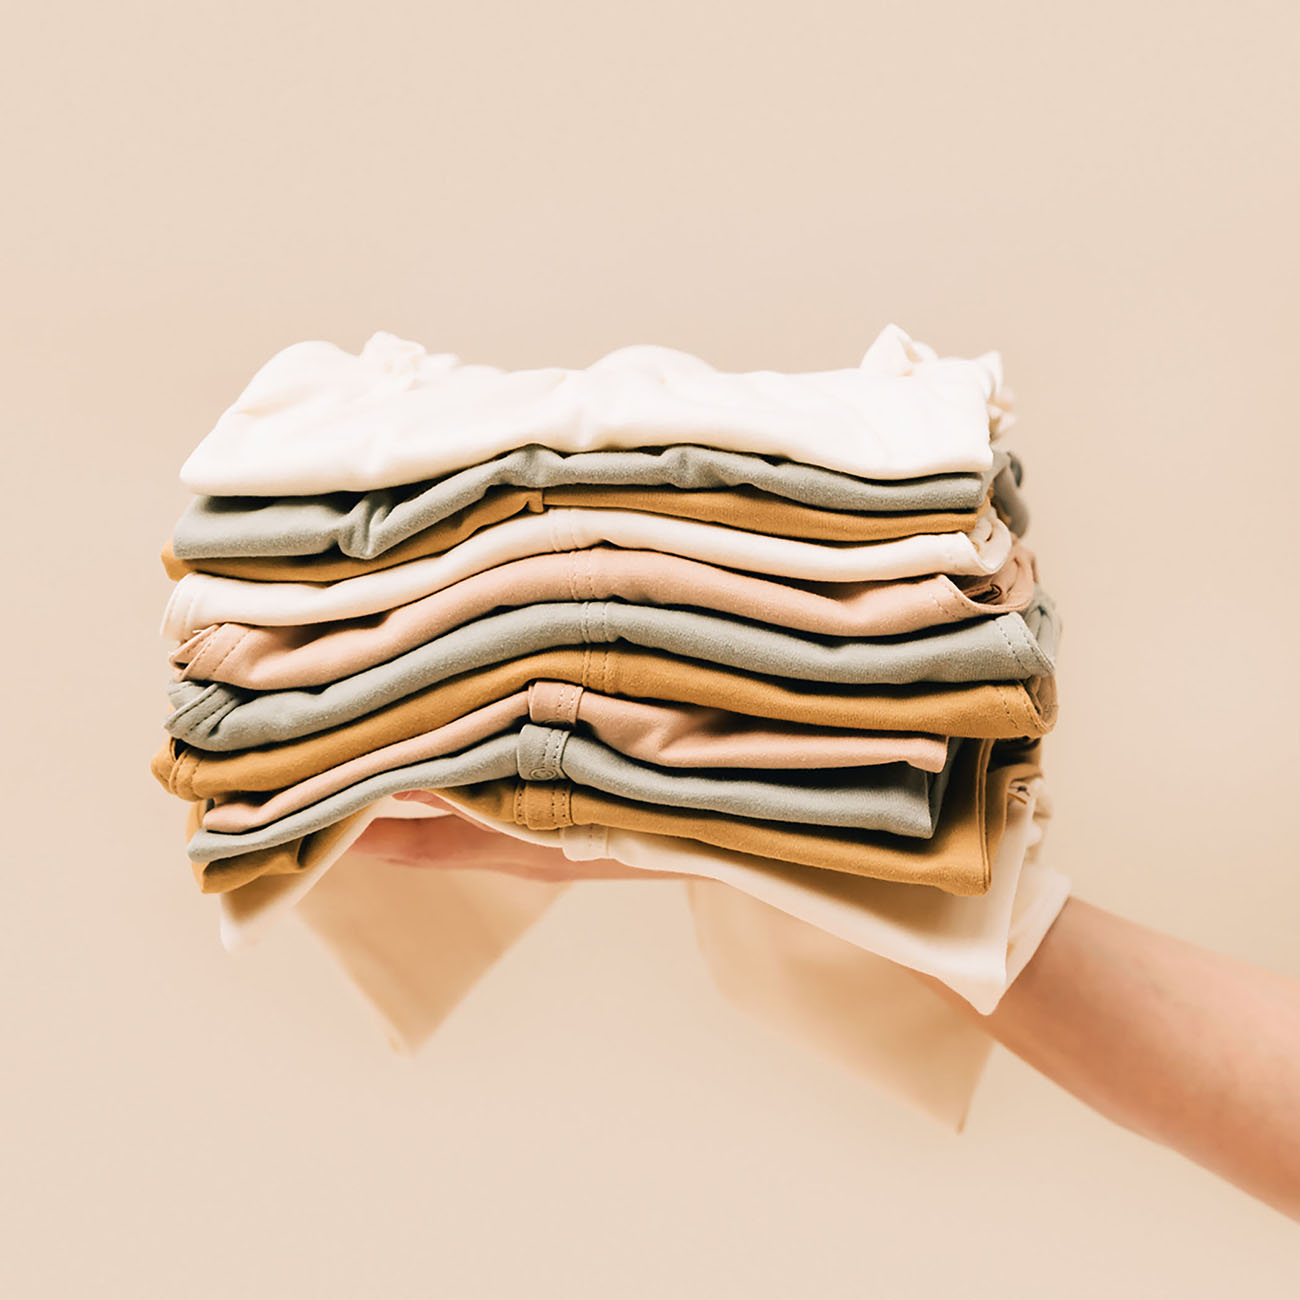 Pile of baby clothing in pima cotton | UAUA Collections